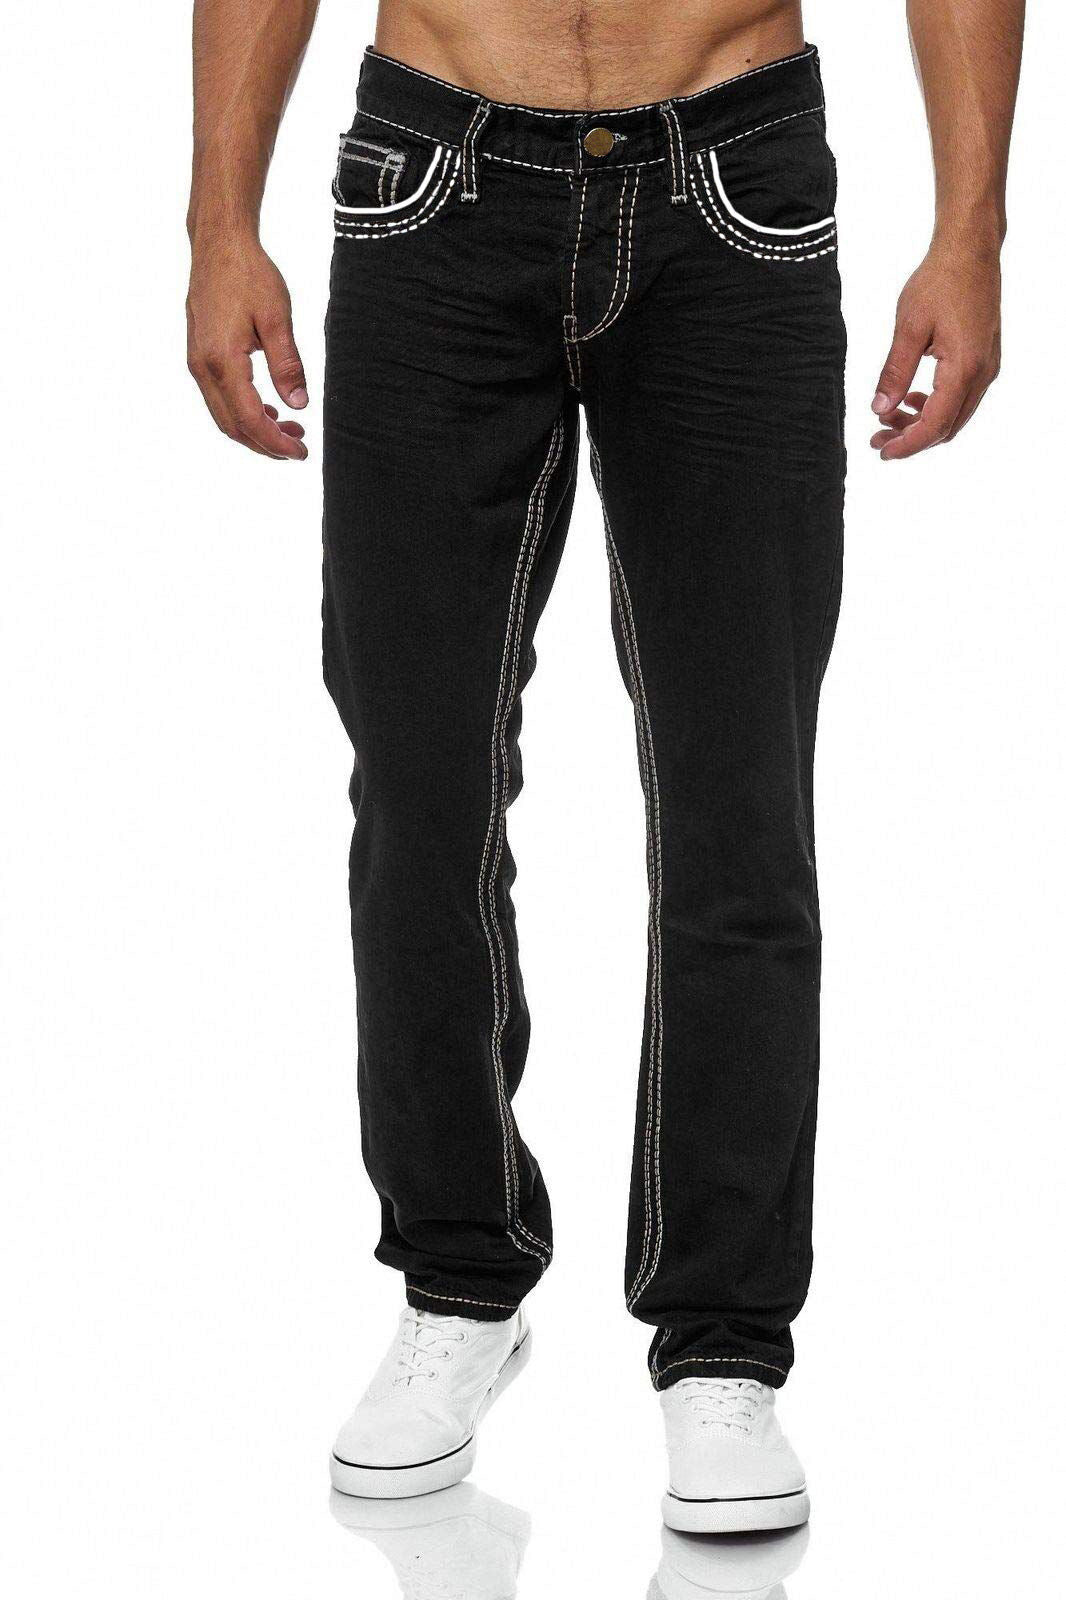 Men Jeans With Pockets Straight Pants Business Casual